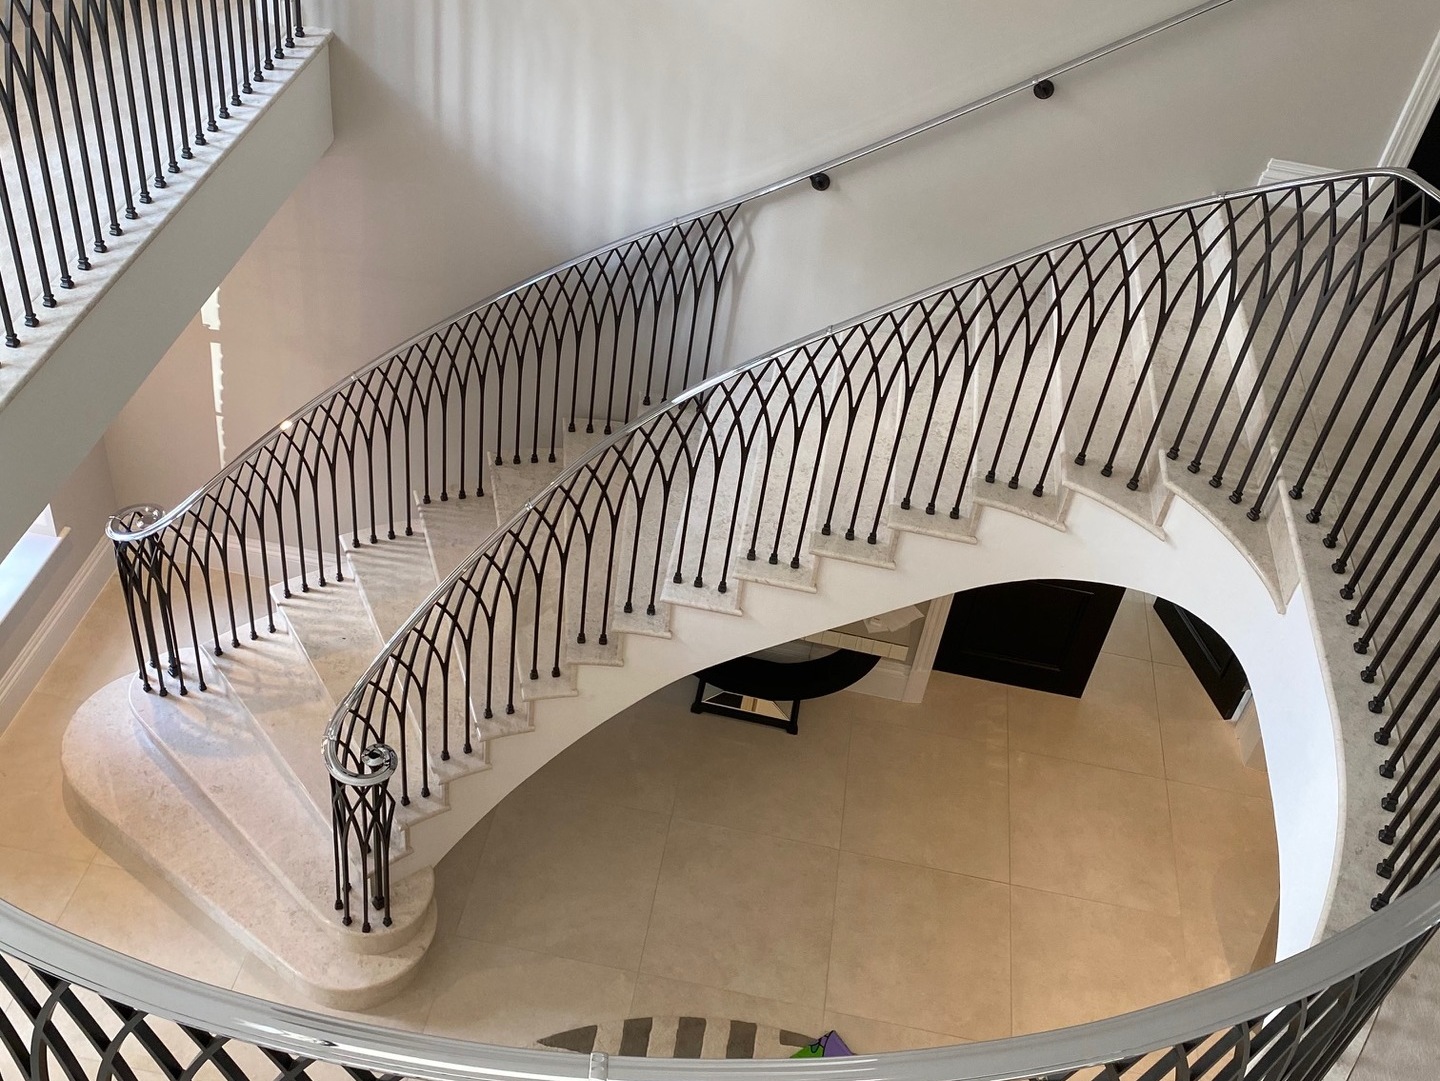 Rear view of precast spiral staircase in entrance hall